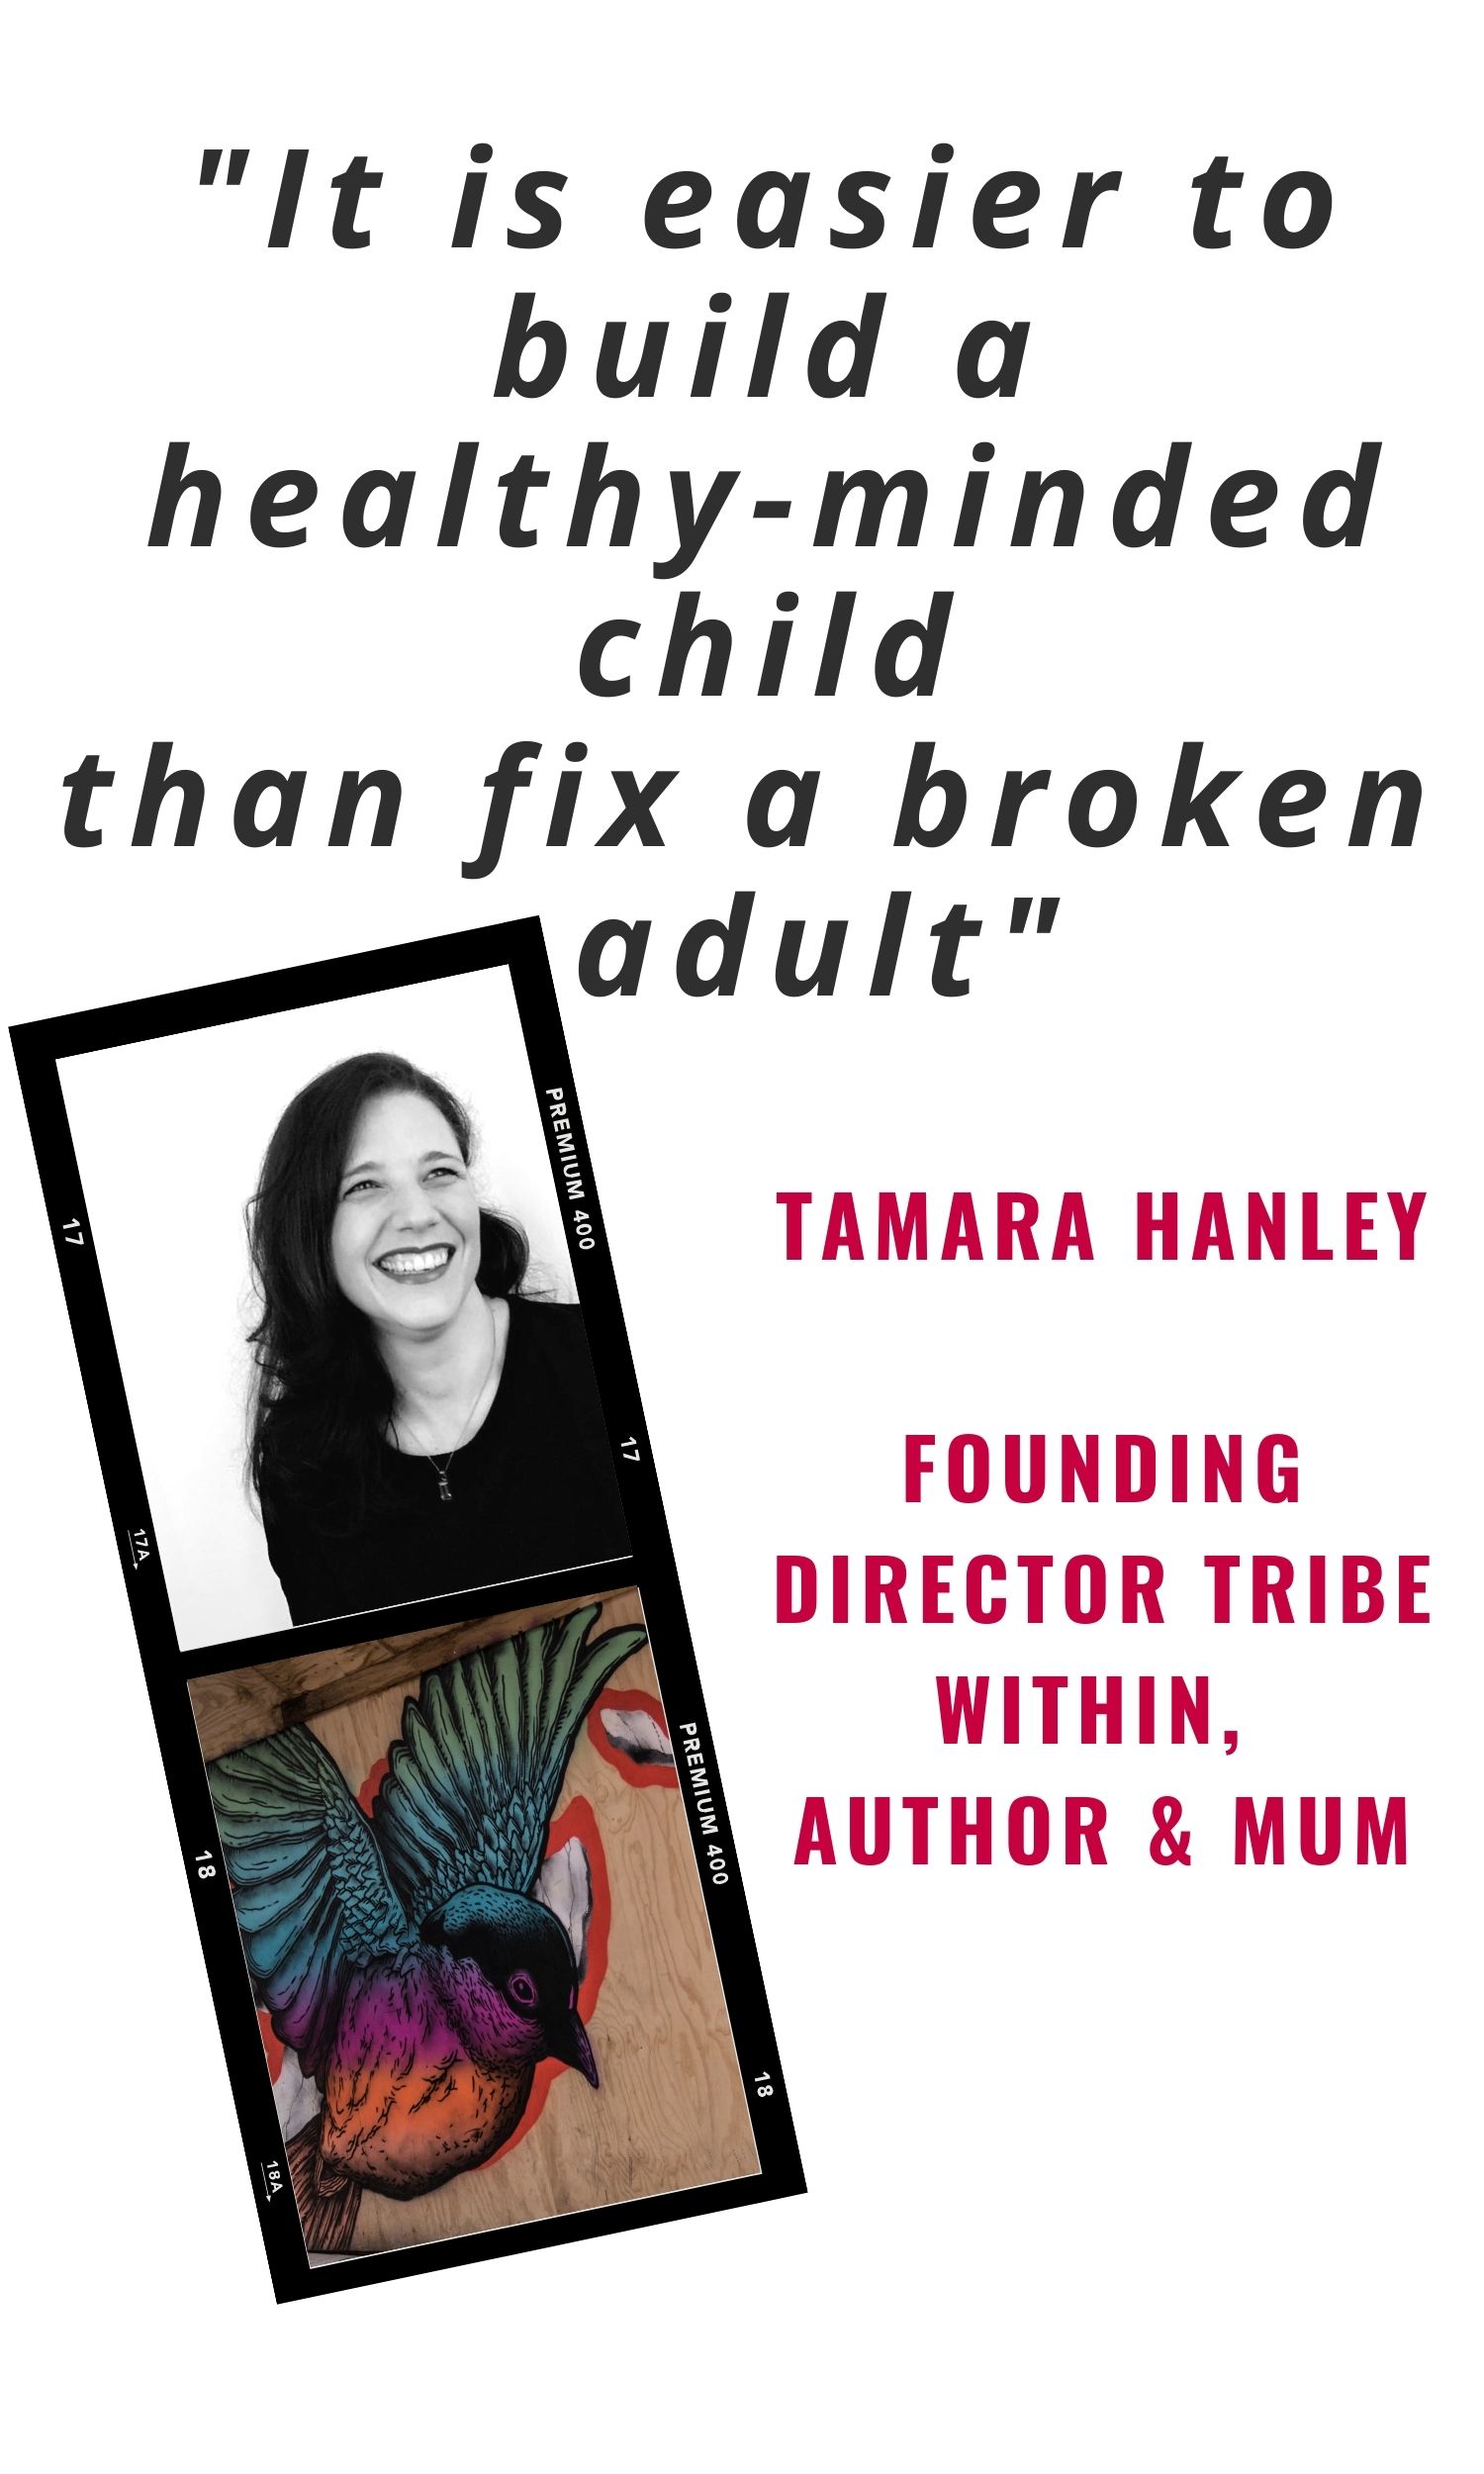 It is easier to build a healthy-minded child than fix a broken adult - Tamara Hanley Founder Tribe Within, Author, Life Coach, Mother